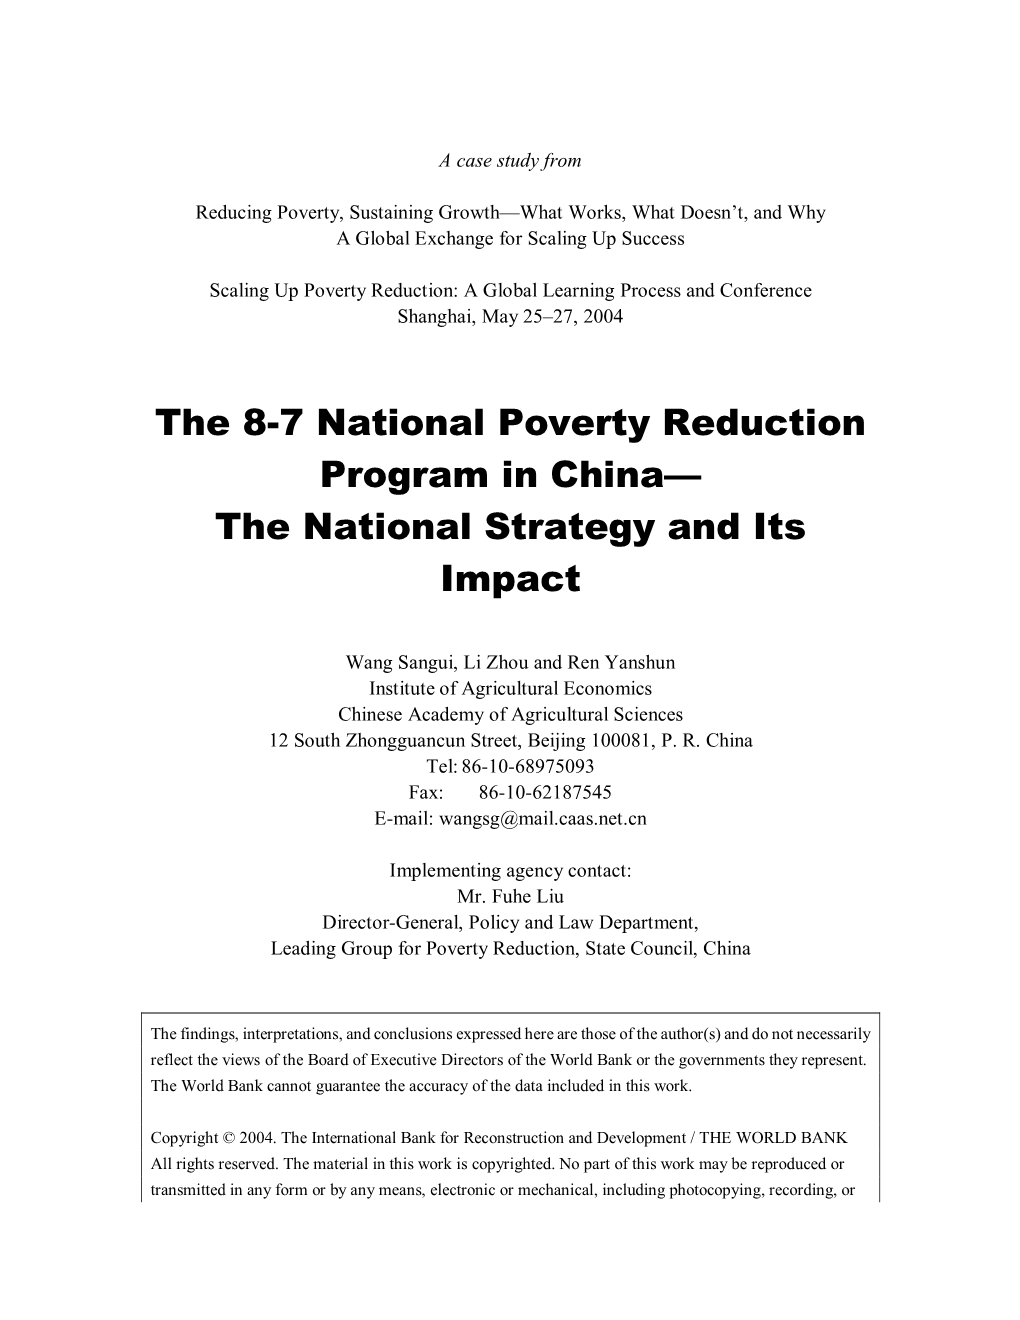 The 8-7 National Poverty Reduction Program in China— the National Strategy and Its Impact